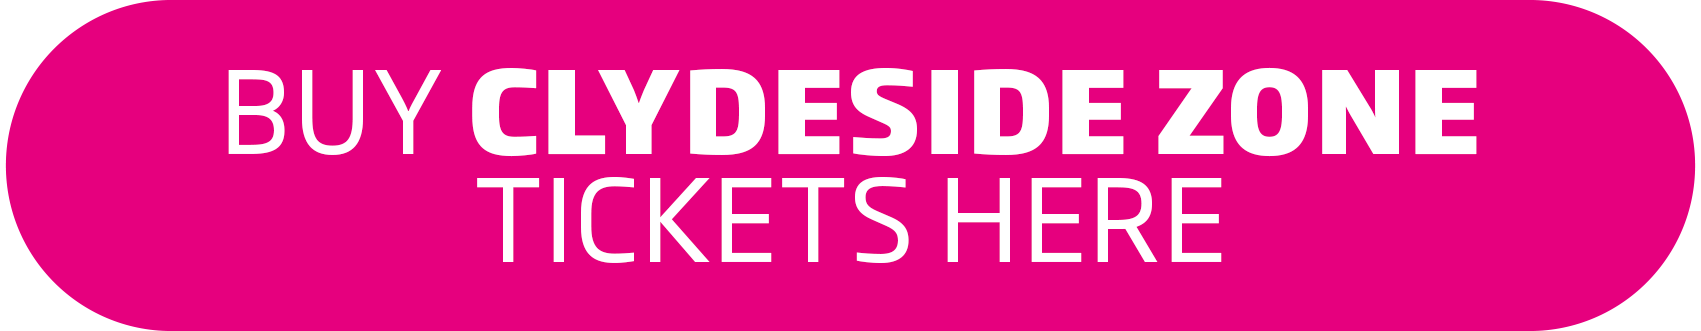 buy clydeside tickets here